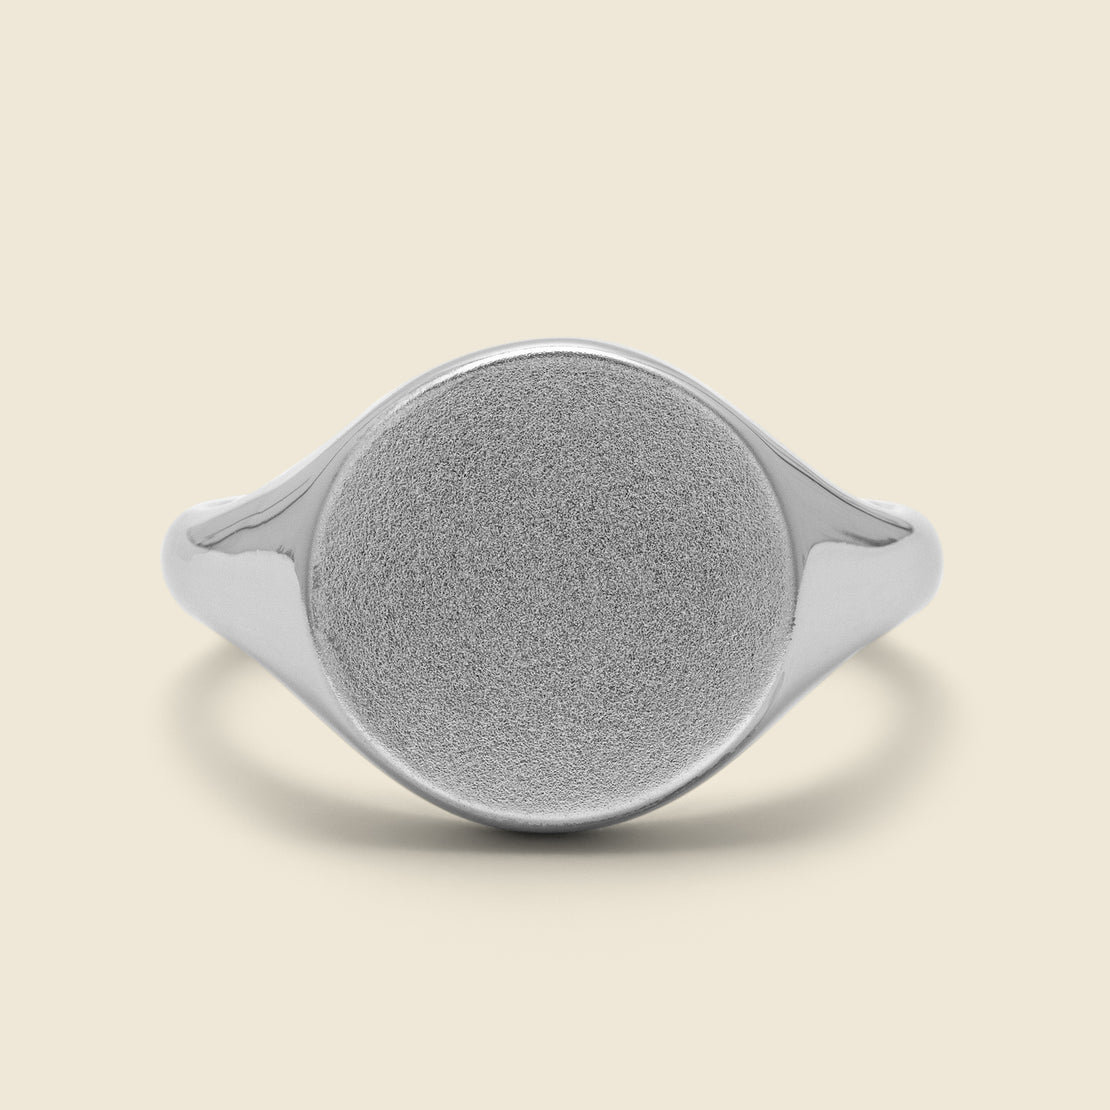 Wells Signet Ring - Sterling Silver - Miansai - STAG Provisions - Accessories - Rings